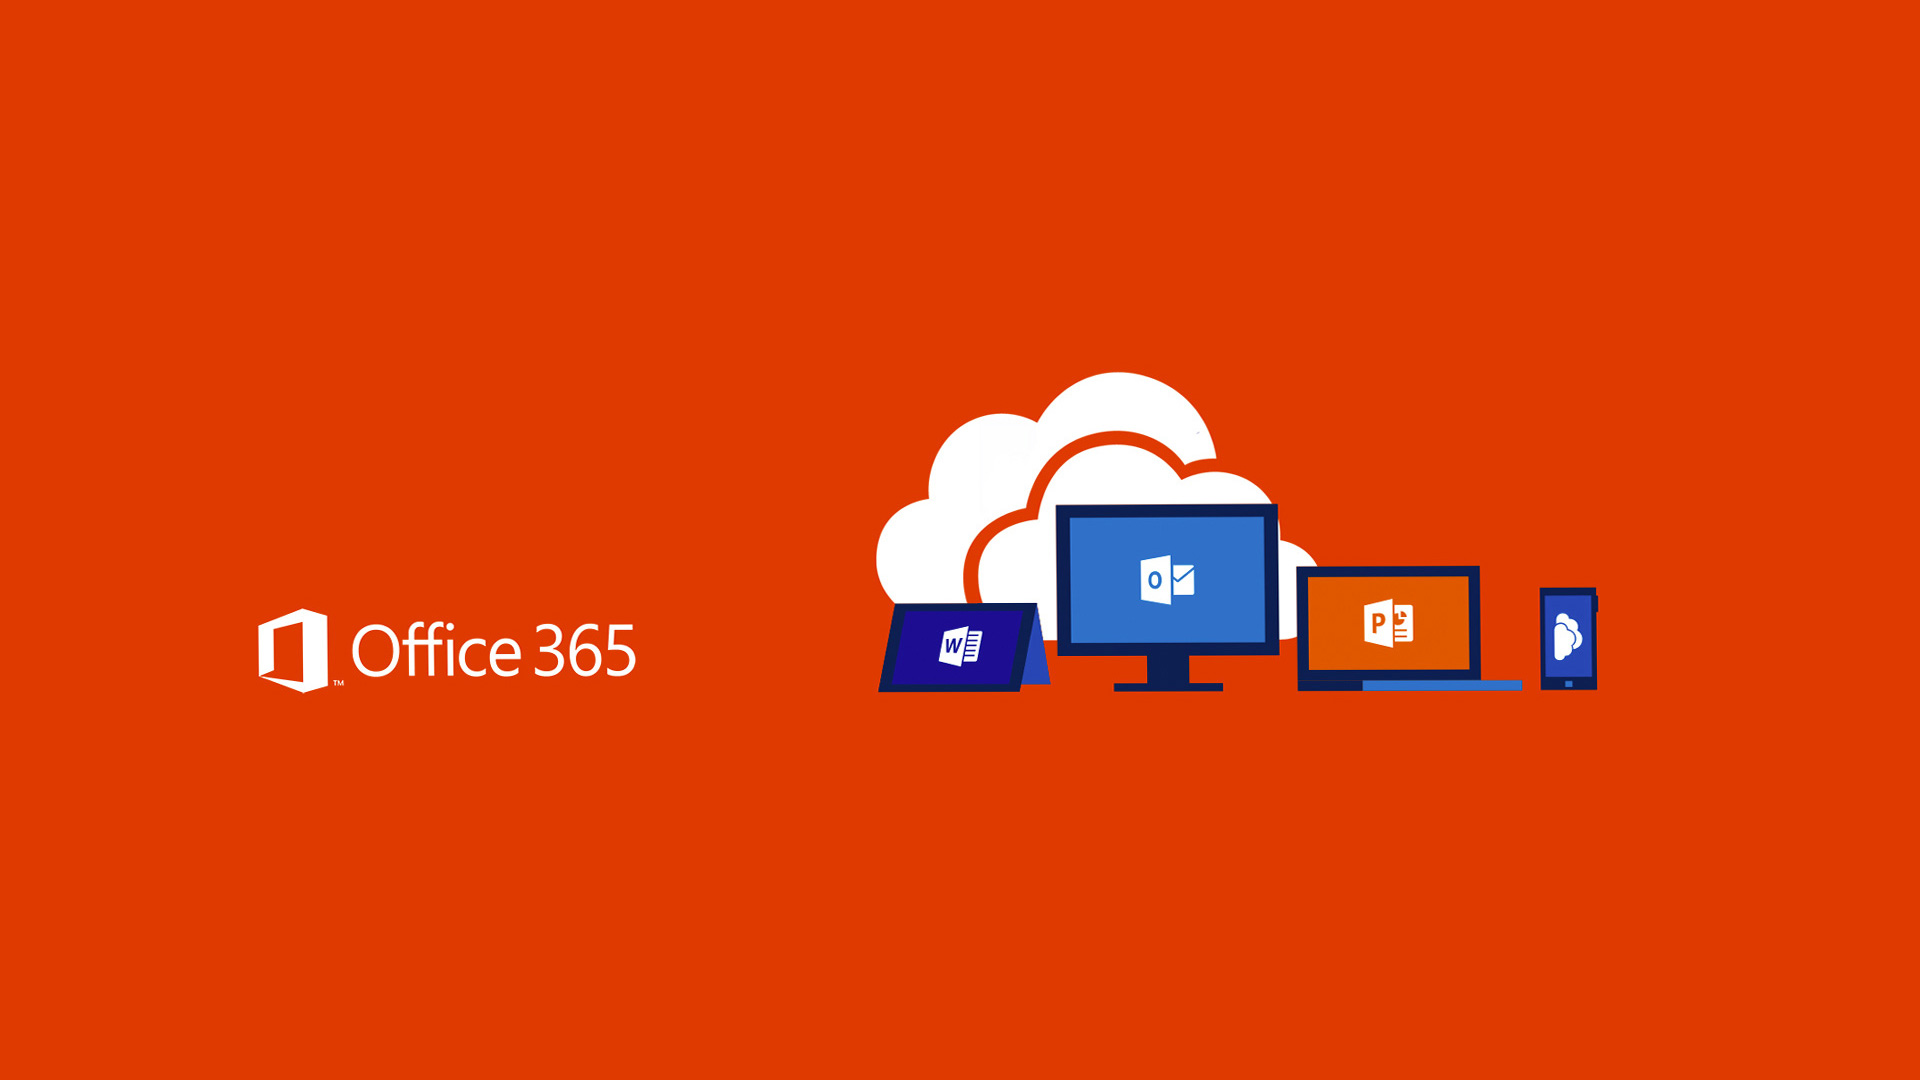 How to Repair Office 365 Using Command Prompt?